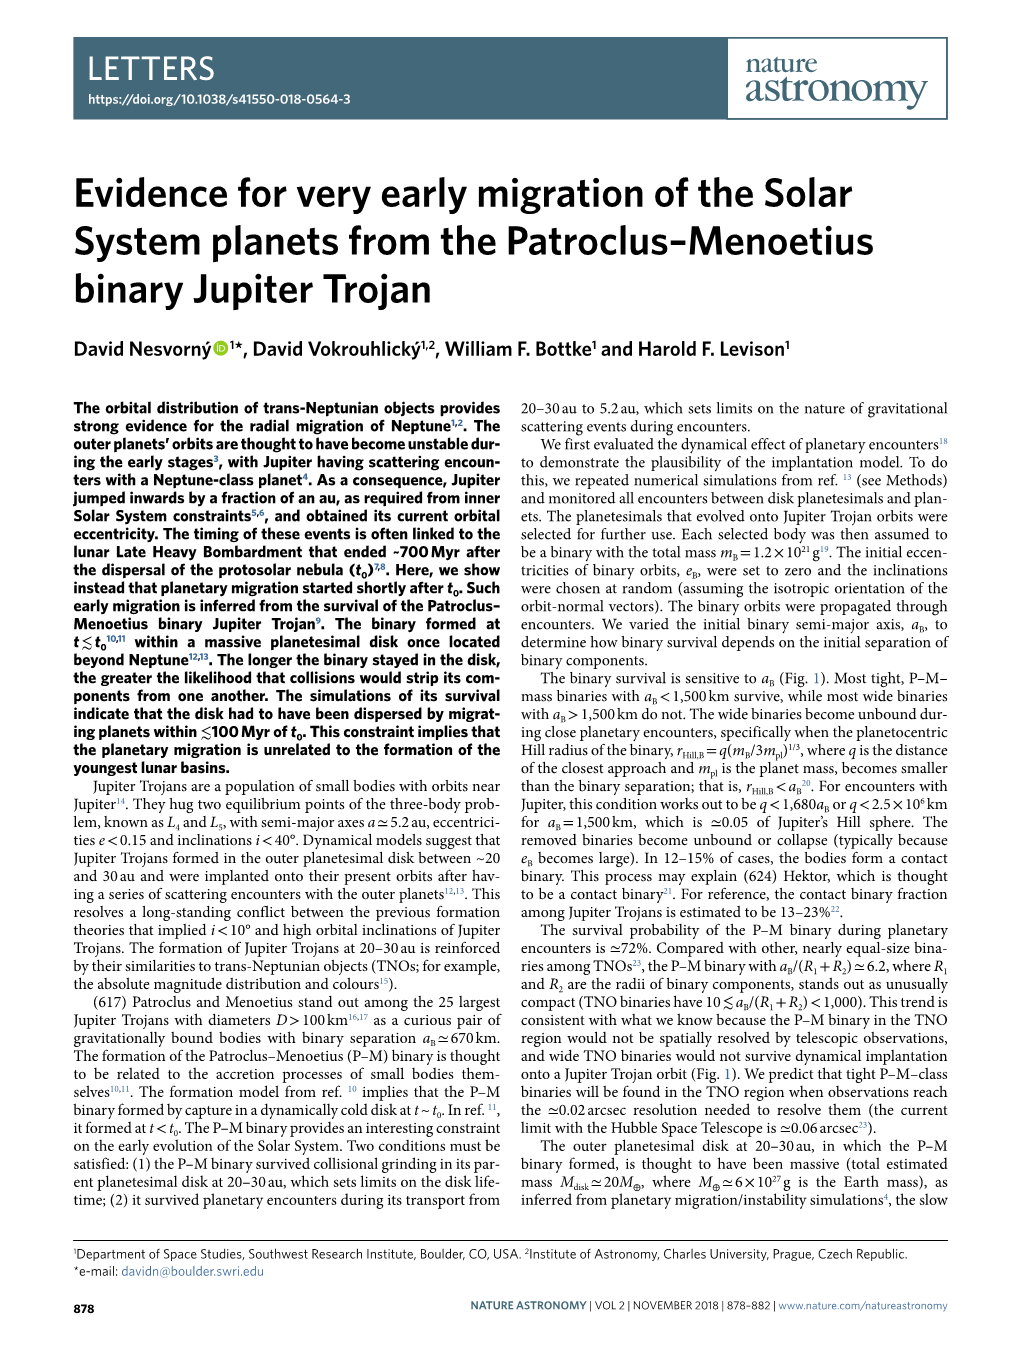 Evidence for Very Early Migration of the Solar System Planets from the Patroclus–Menoetius Binary Jupiter Trojan